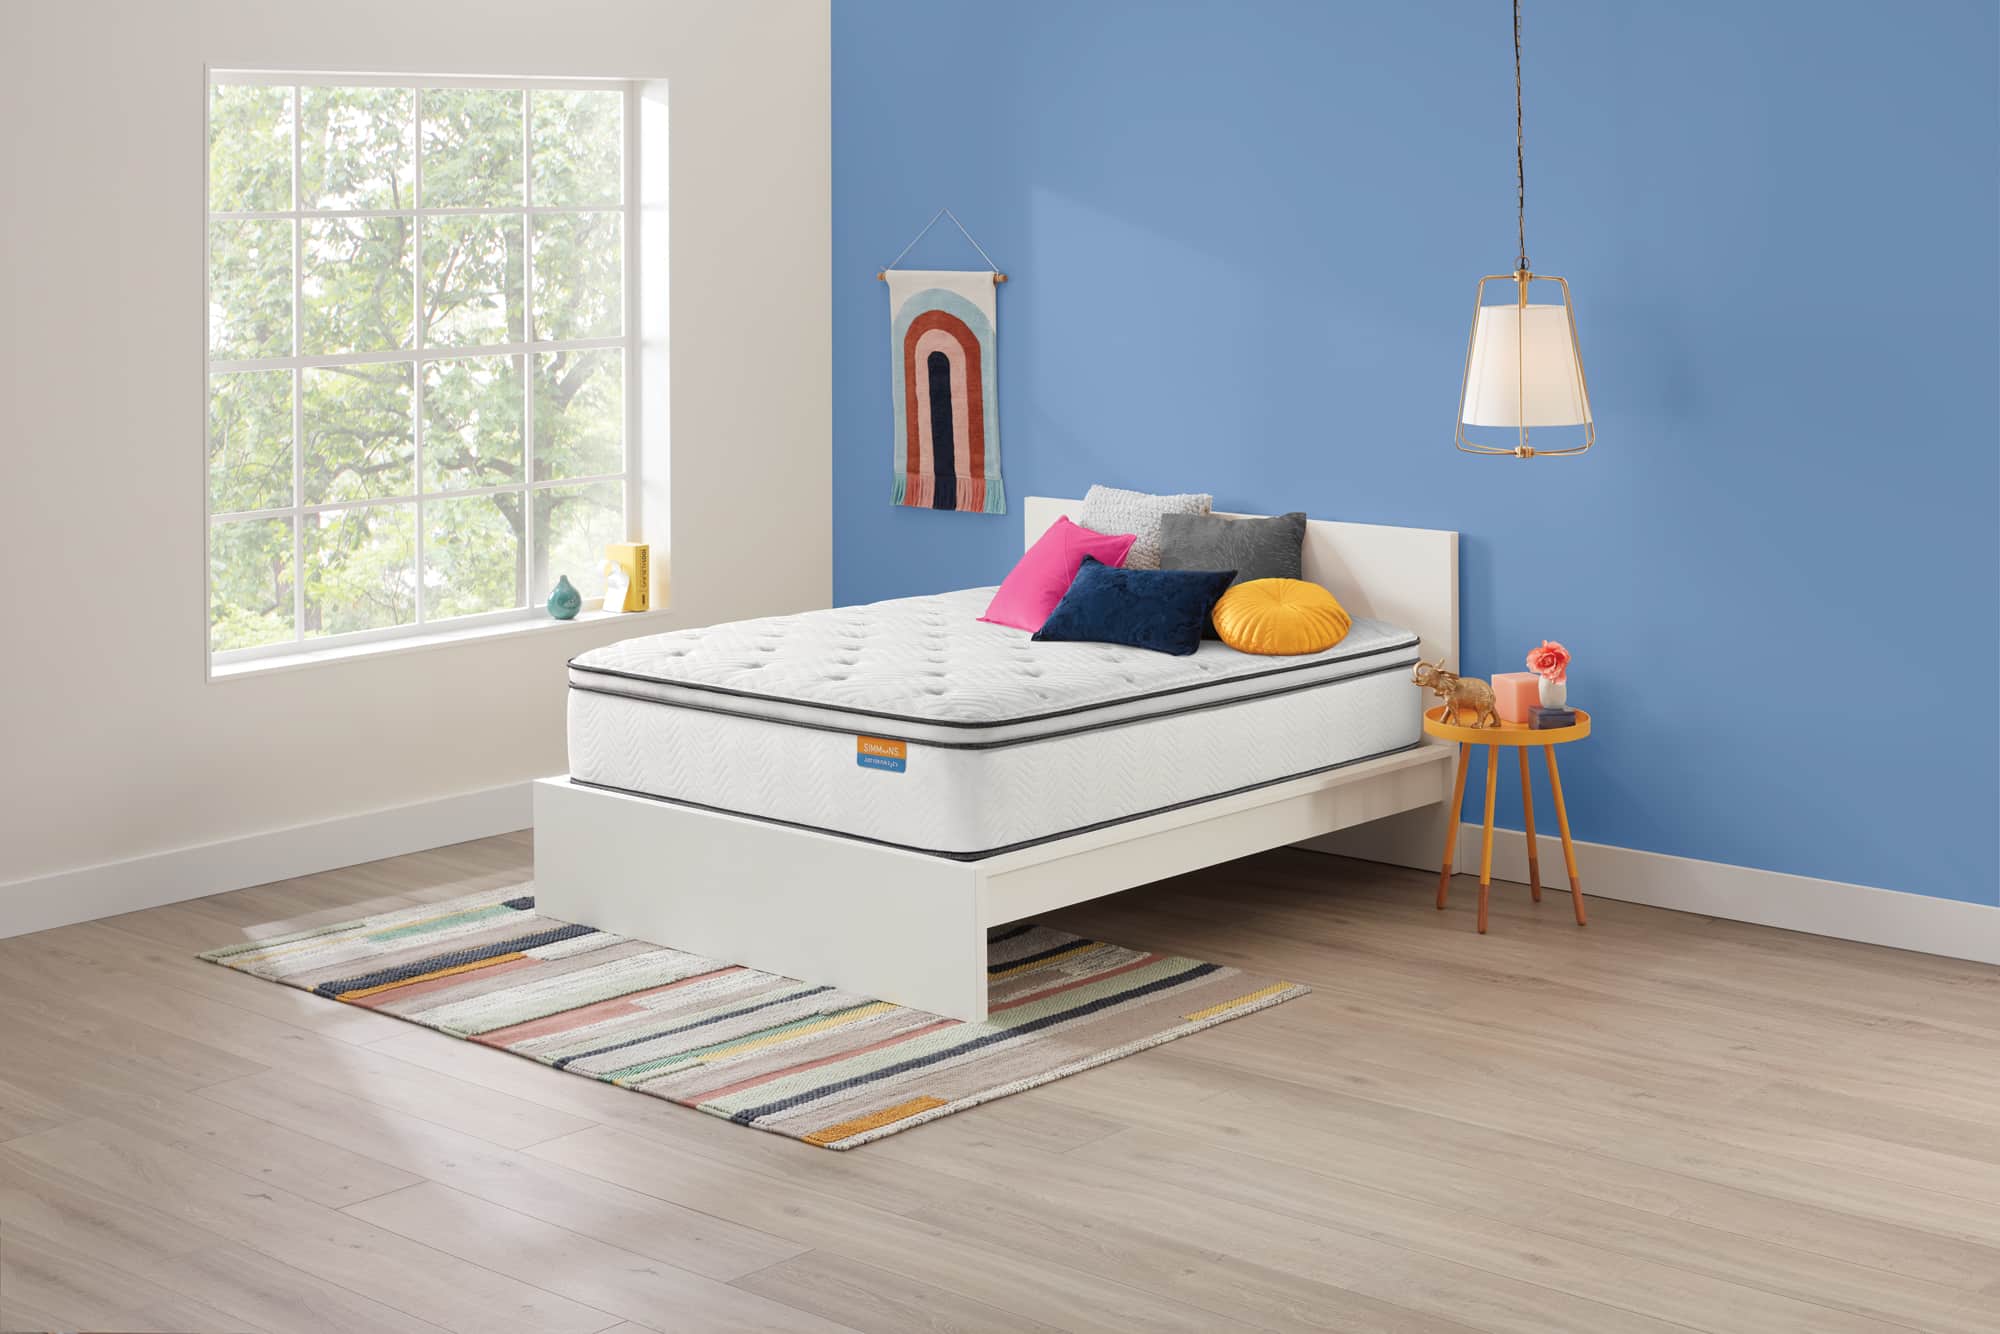 Simmons Dreamwell mattress in blue room with rug